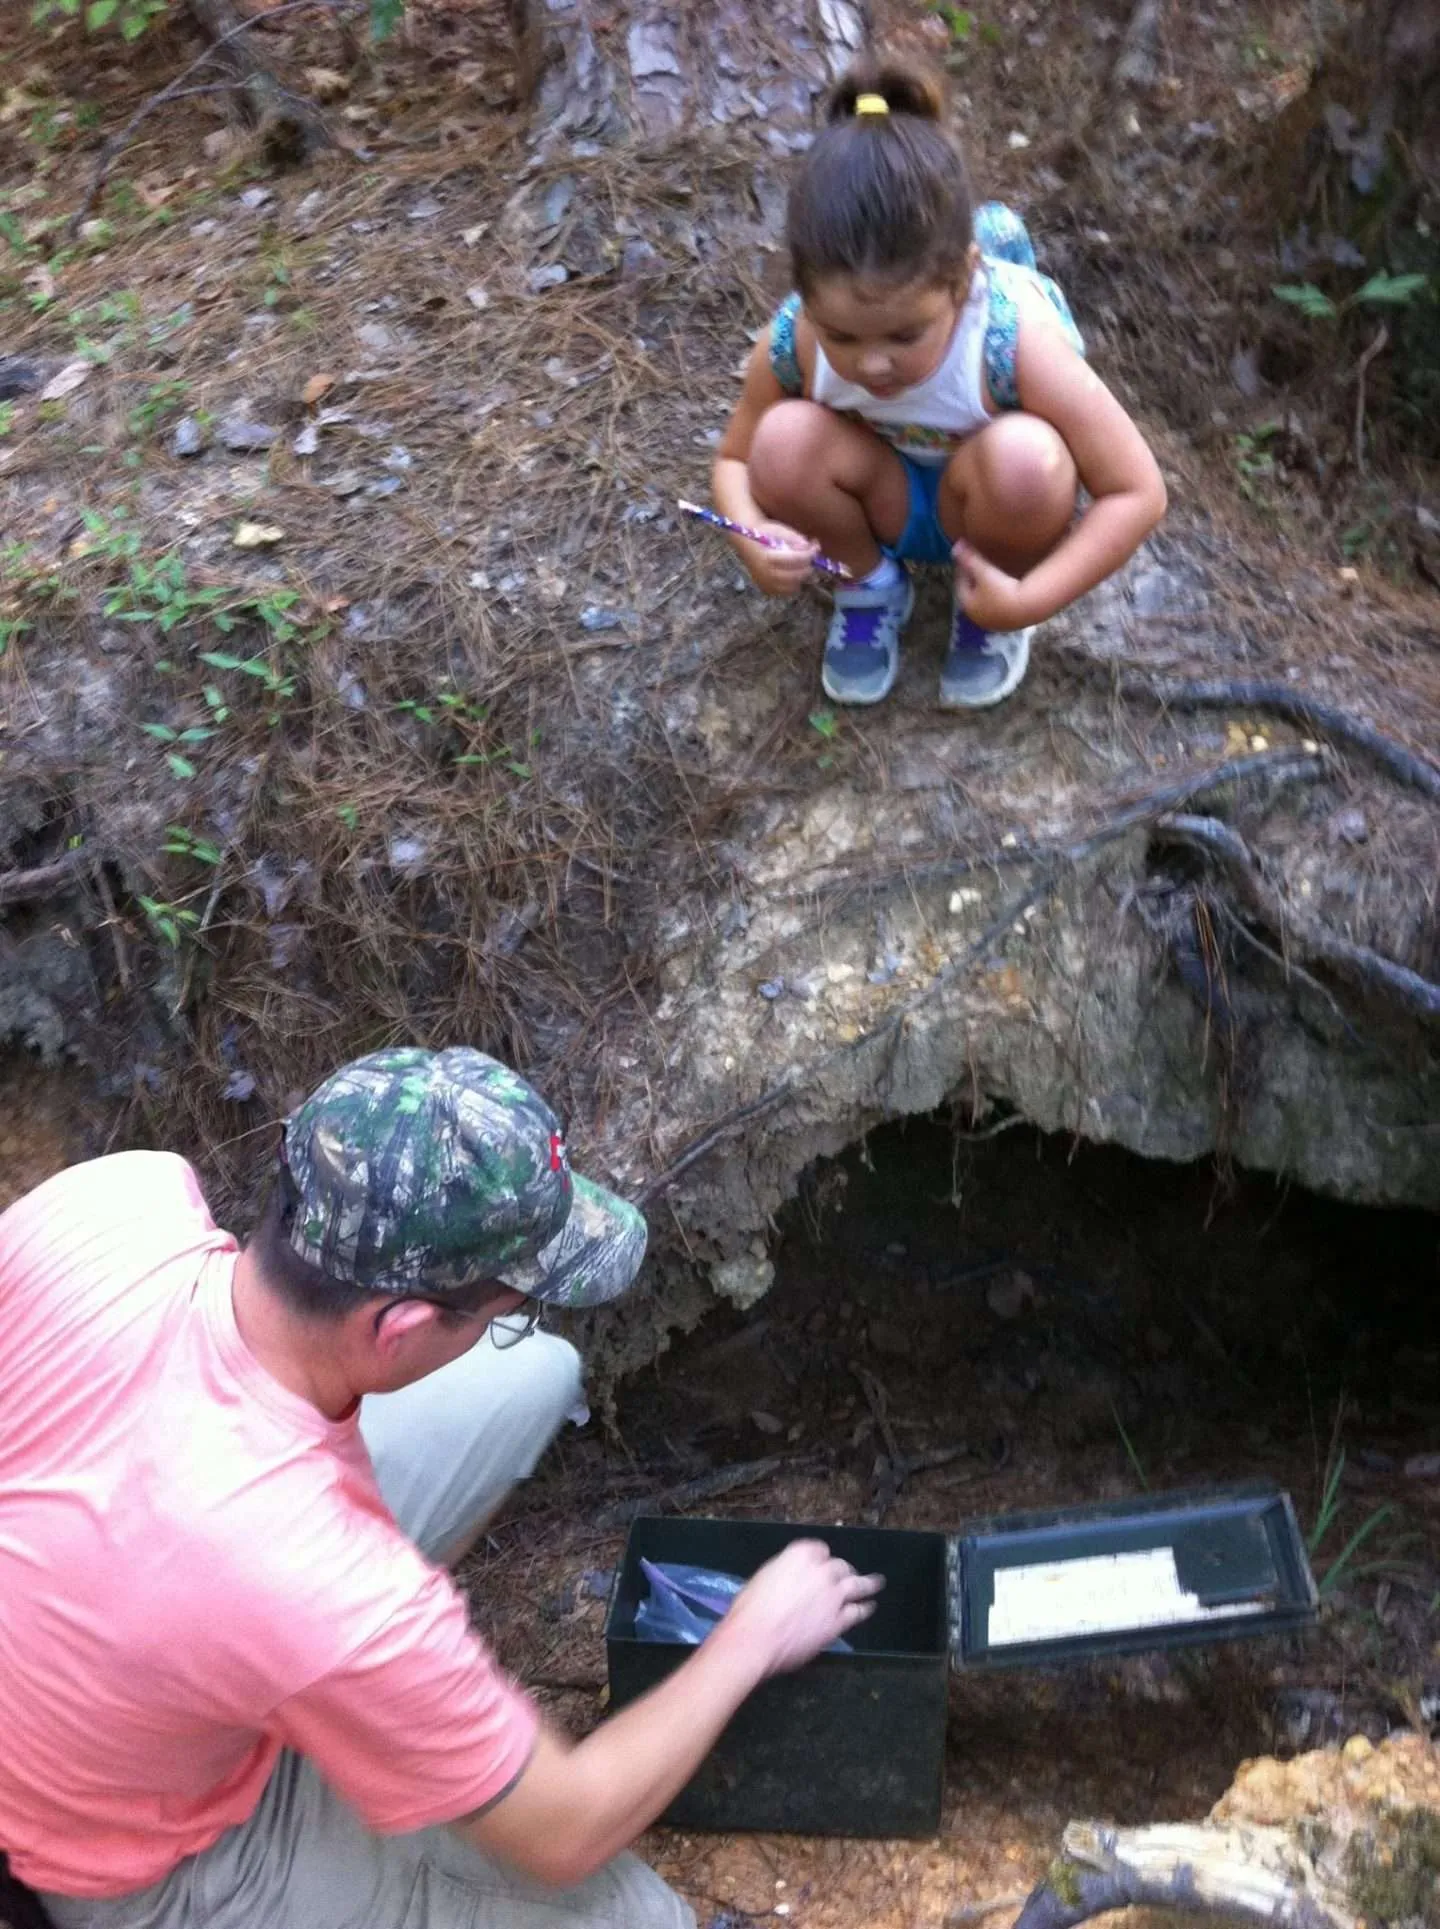 Things to do at Fort Johnson: Go geocaching.